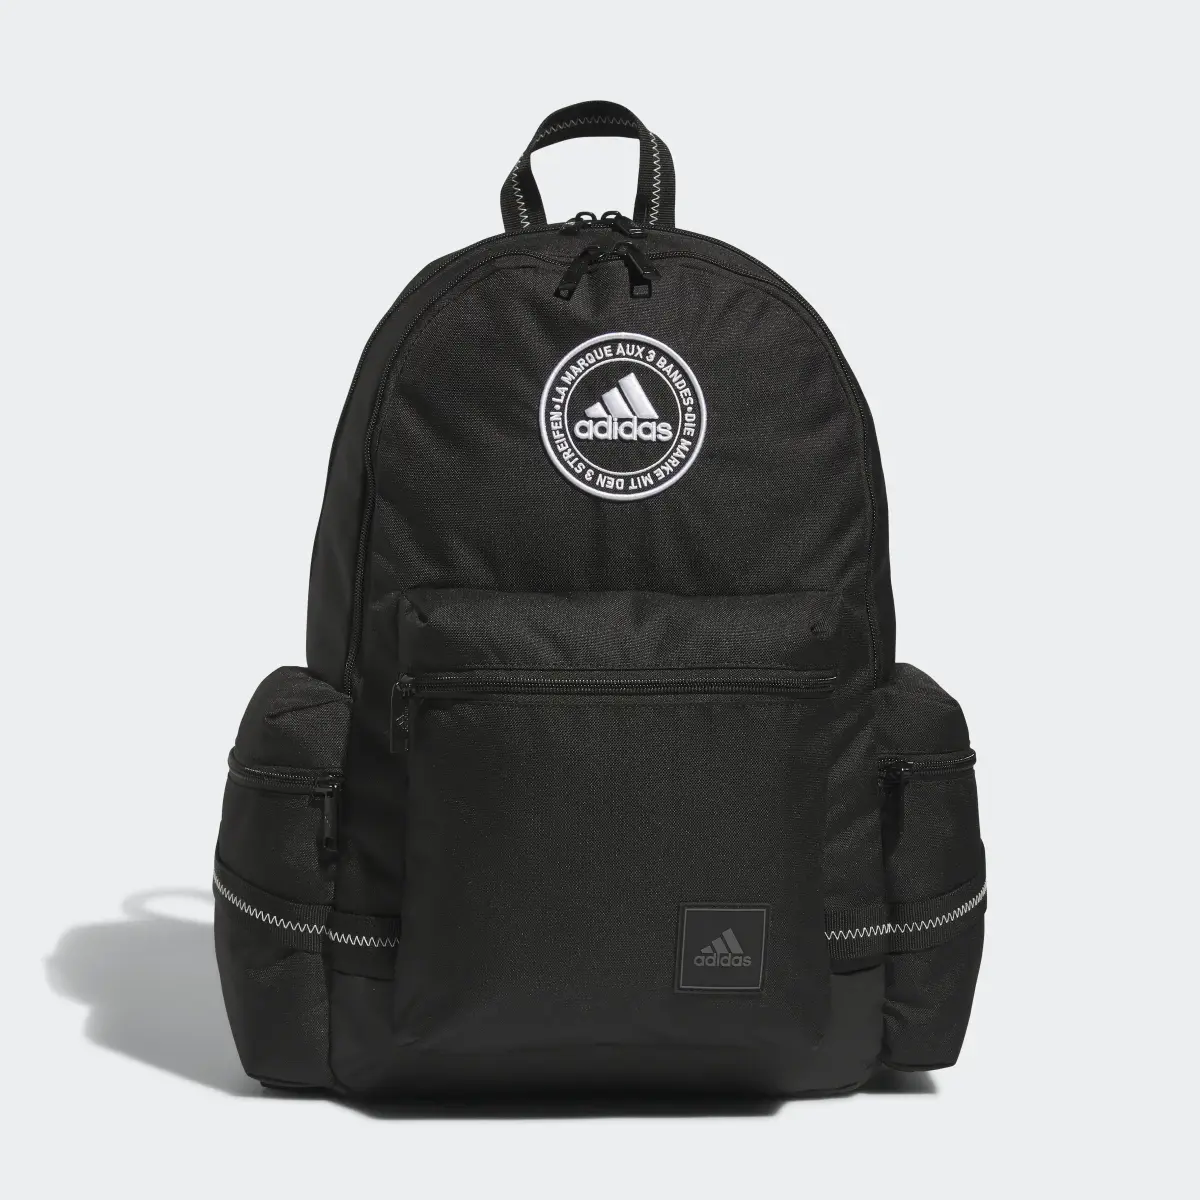 Adidas City Icon Backpack. 2